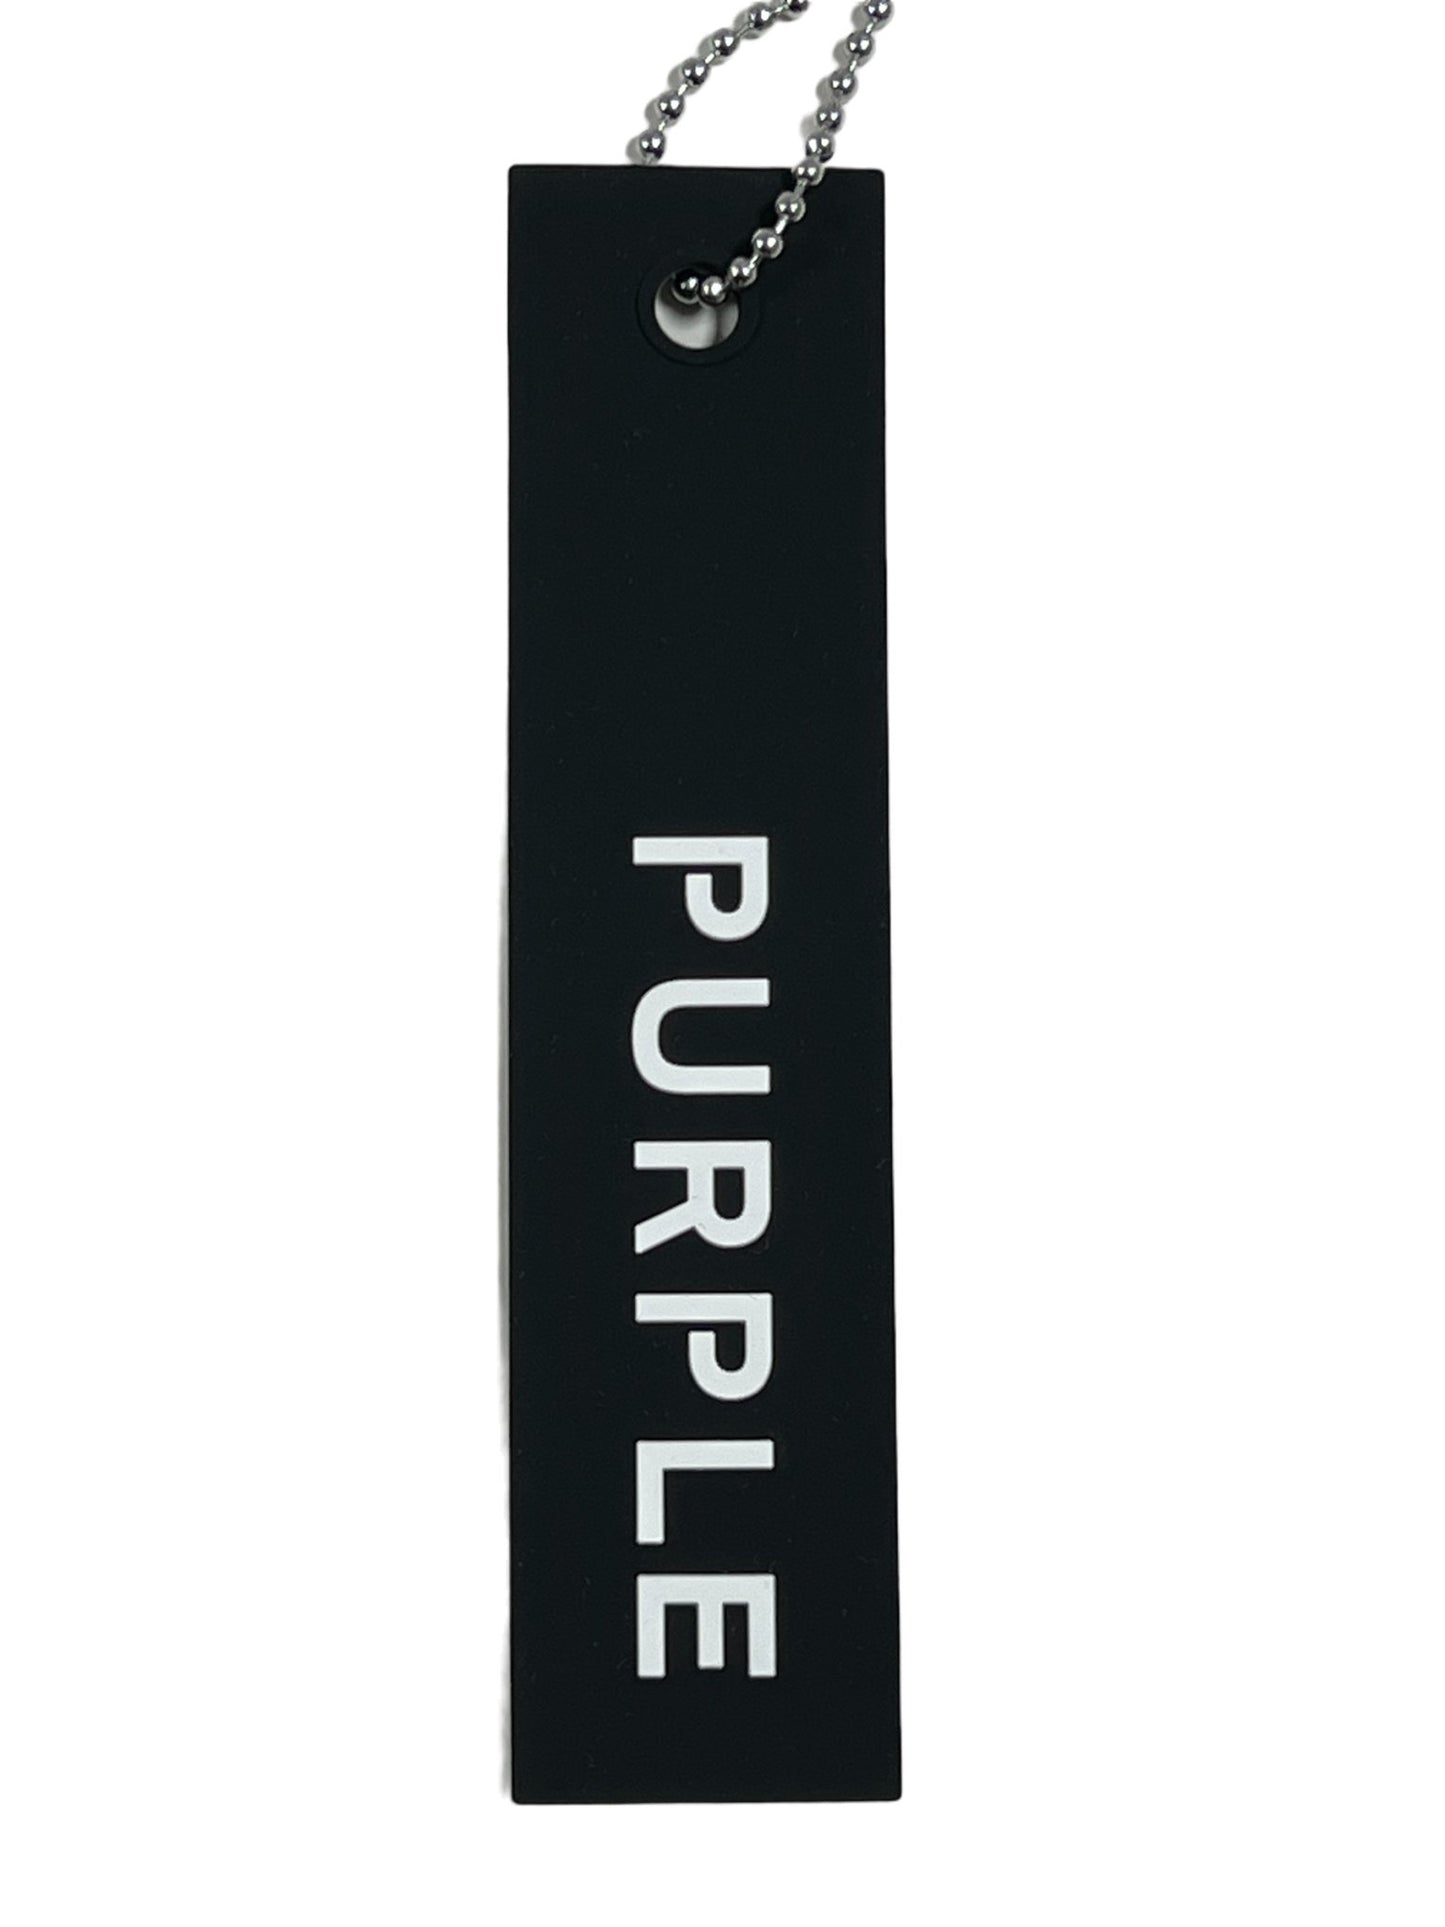 A black tag with the word "PURPLE BRAND" written in white capital letters, hanging from a Polyester chain.